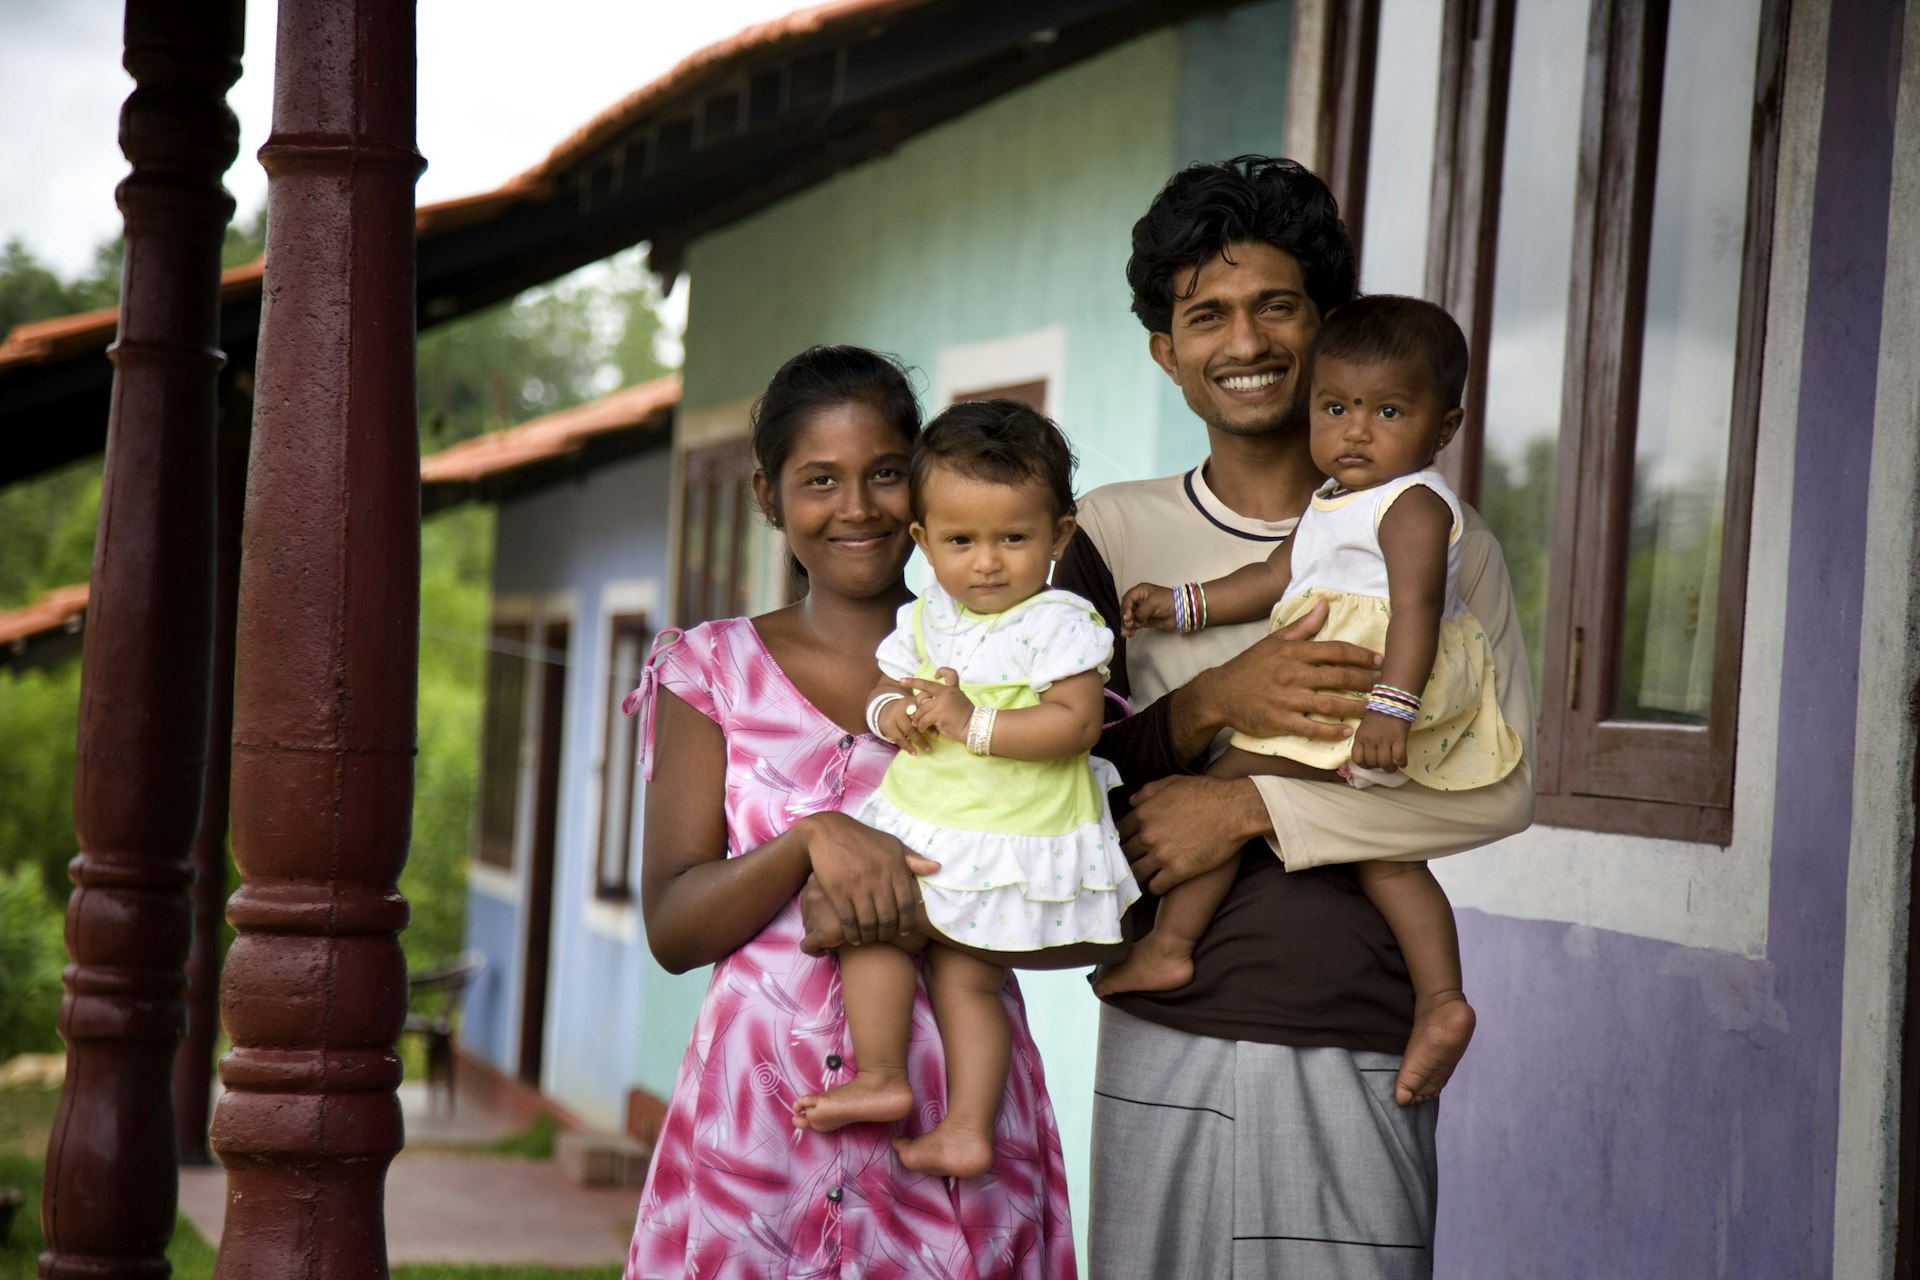 A Sri Lankan family of a woman, man, and two small babies. The adults are smiling into the camera